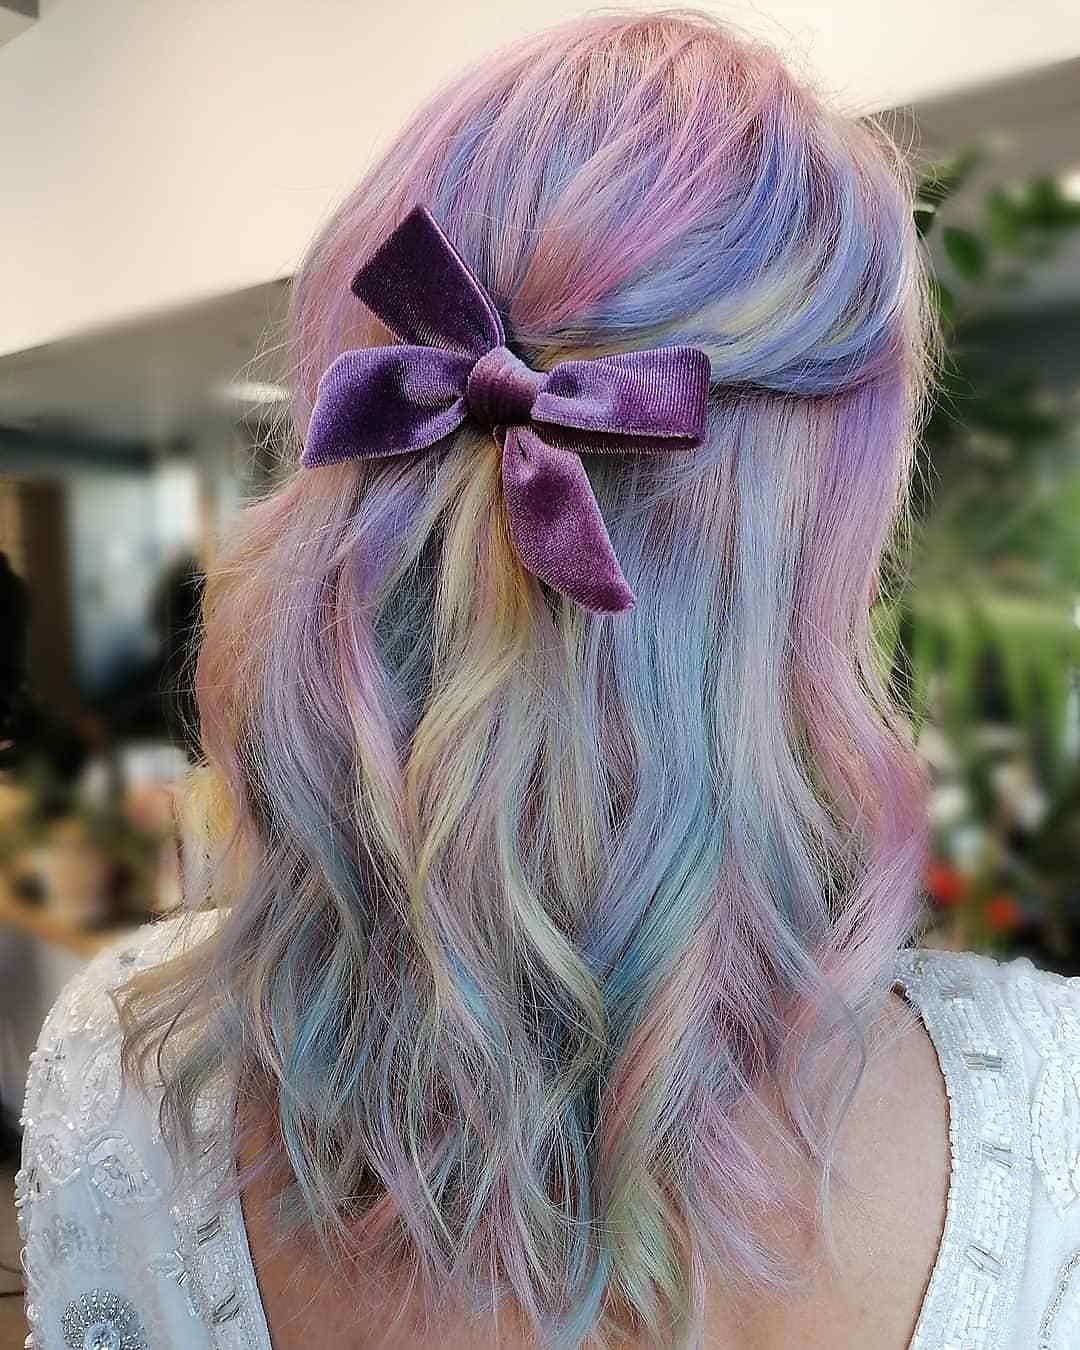 Schwarzkopf Professional - When #BLONDME met #ChromaID 😍
*Formula* 👉 @aija_mil_hair used our mix and tone system – Chroma ID – to create this kaleidoscope of colour! Pink, Purple, Blue, Yellow, Clear...